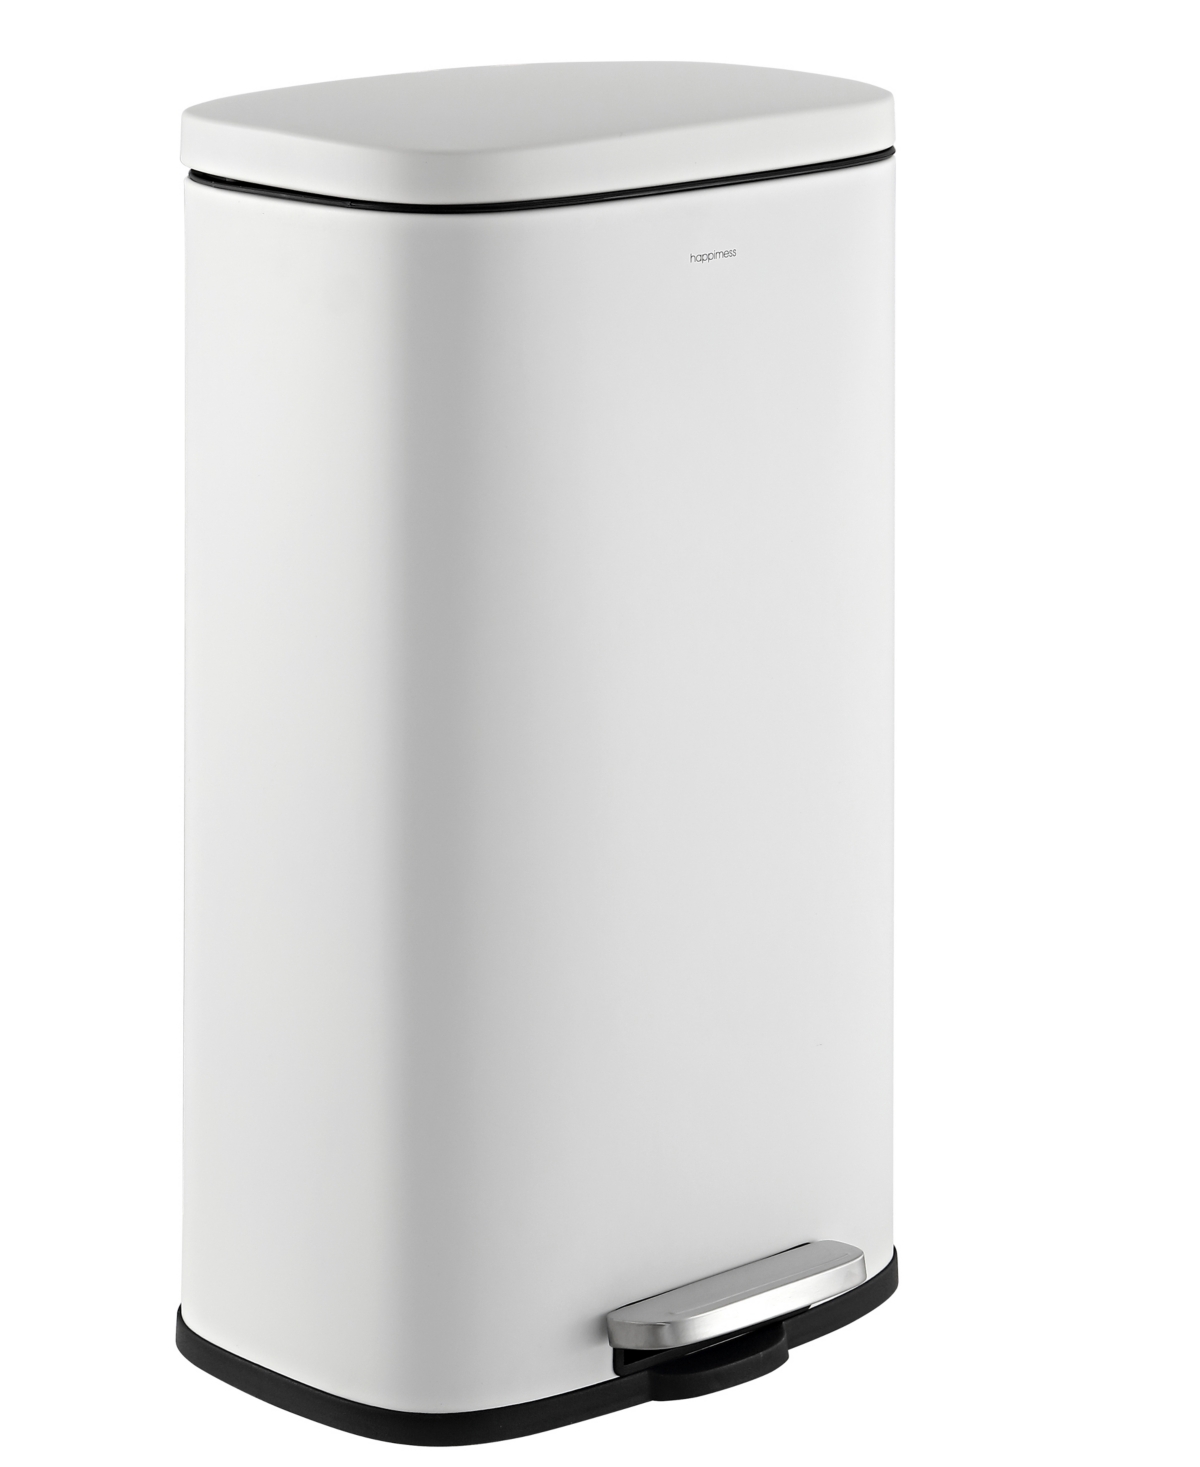 Curtis Step-Open Trash Can - White